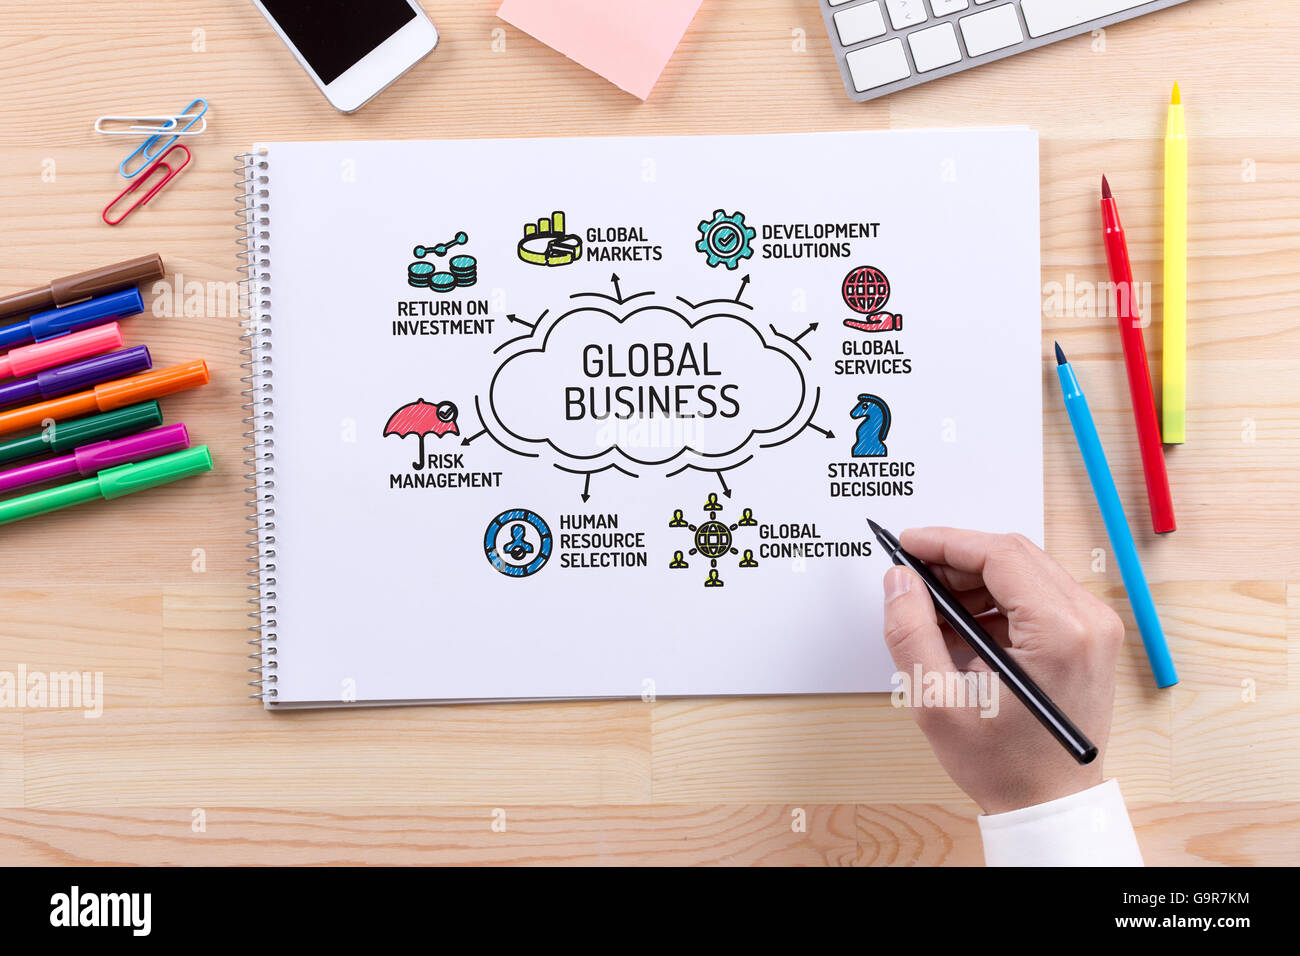 Global Business chart with keywords and sketch icons Stock Photo